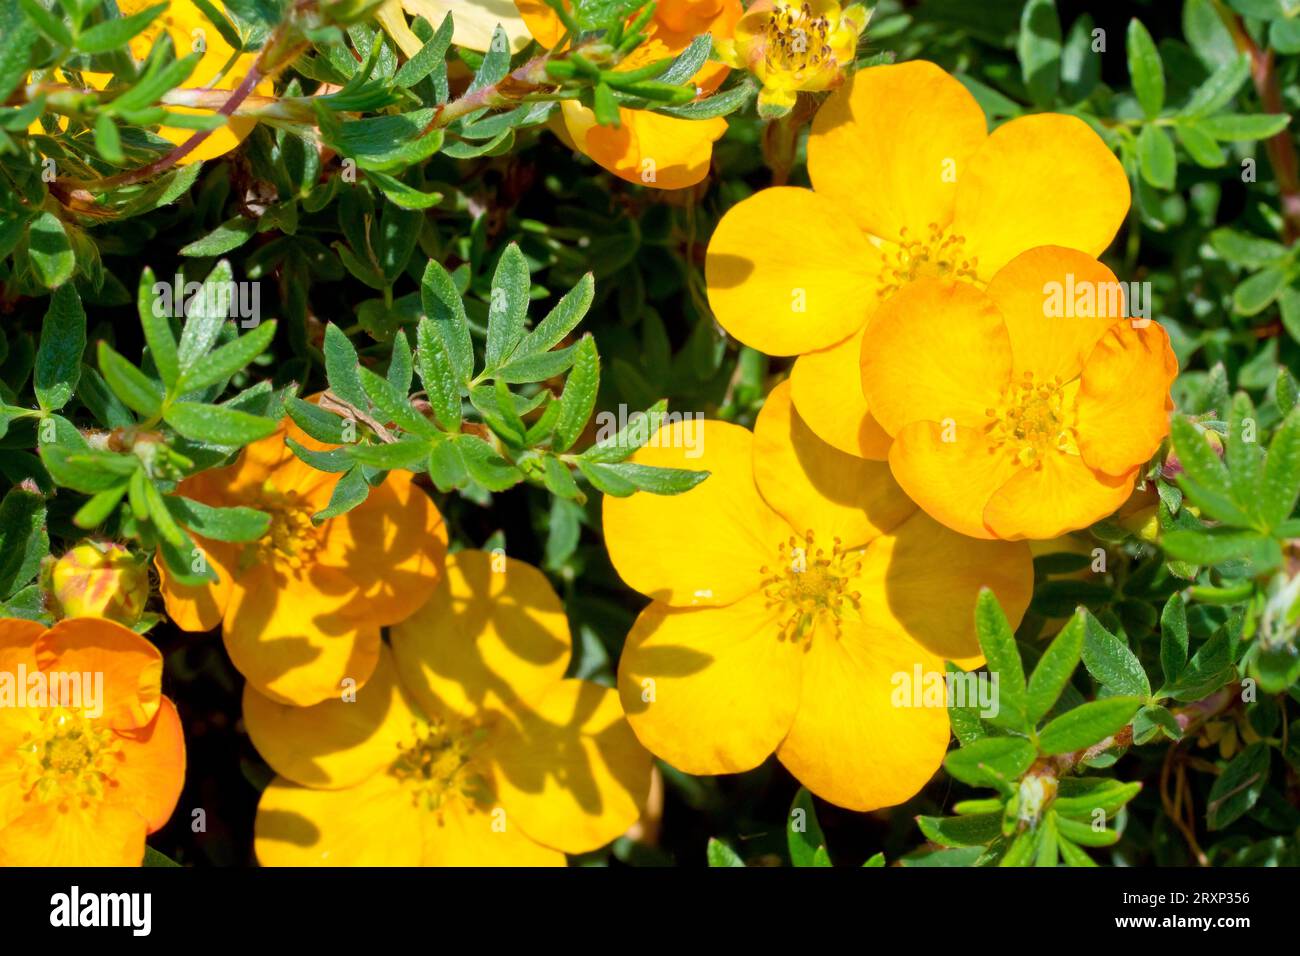 Shrubby Cinquefoil (potentilla fruticosa), possibly cultivar Bella Sol, close up showing the yellow-orange flowers and leaves of the shrub. Stock Photo